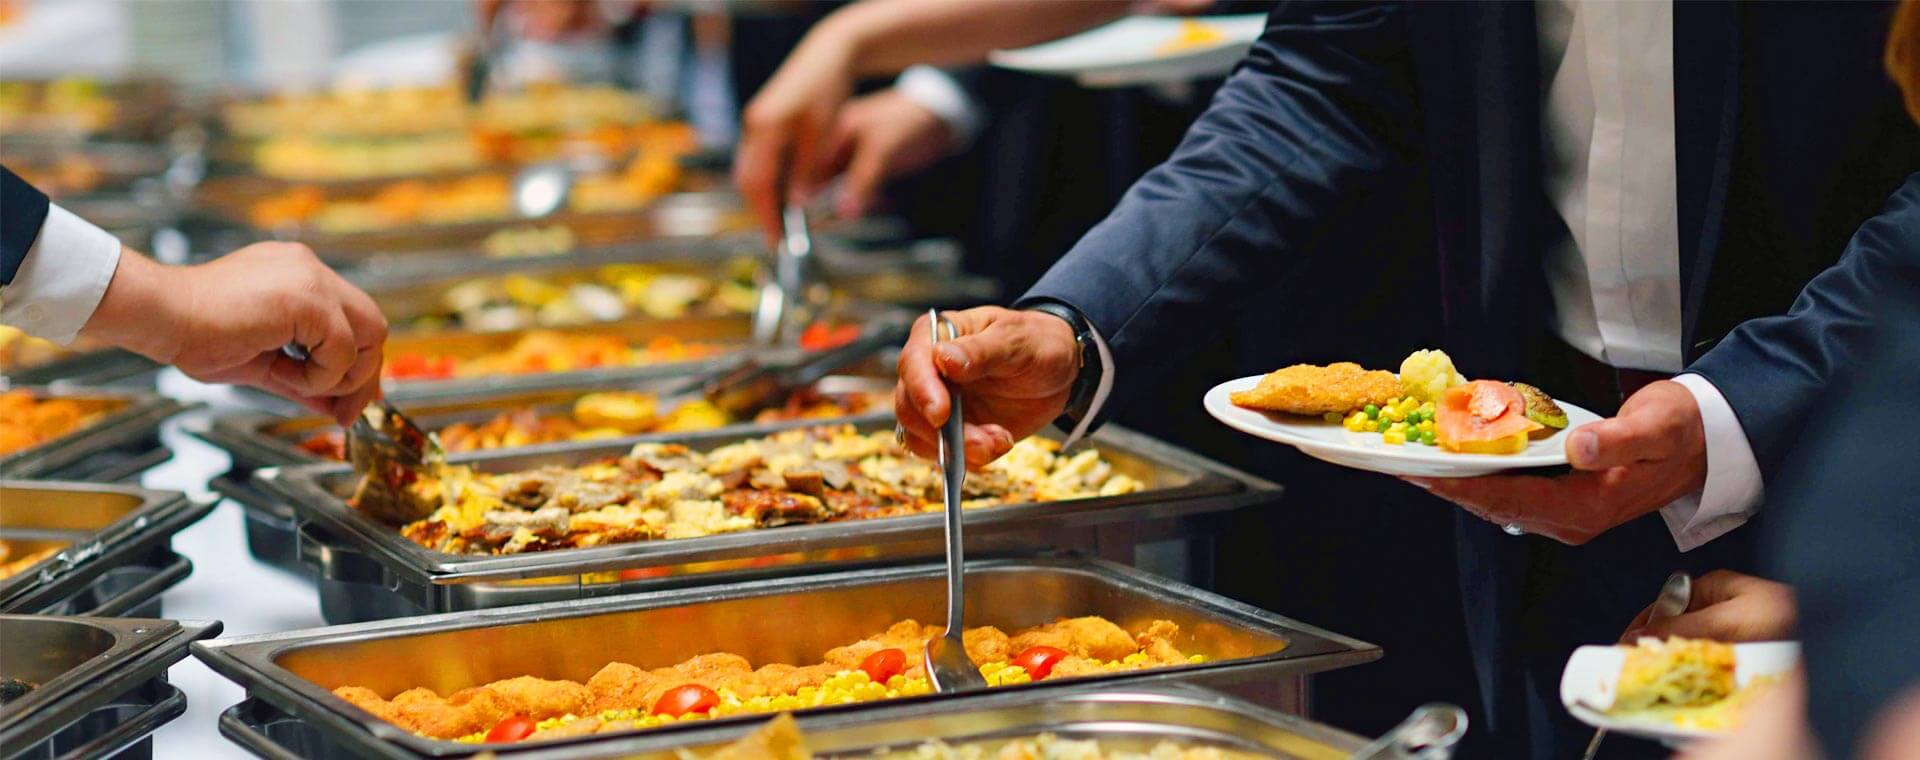 100+ Best Caterers Quotes and Captions